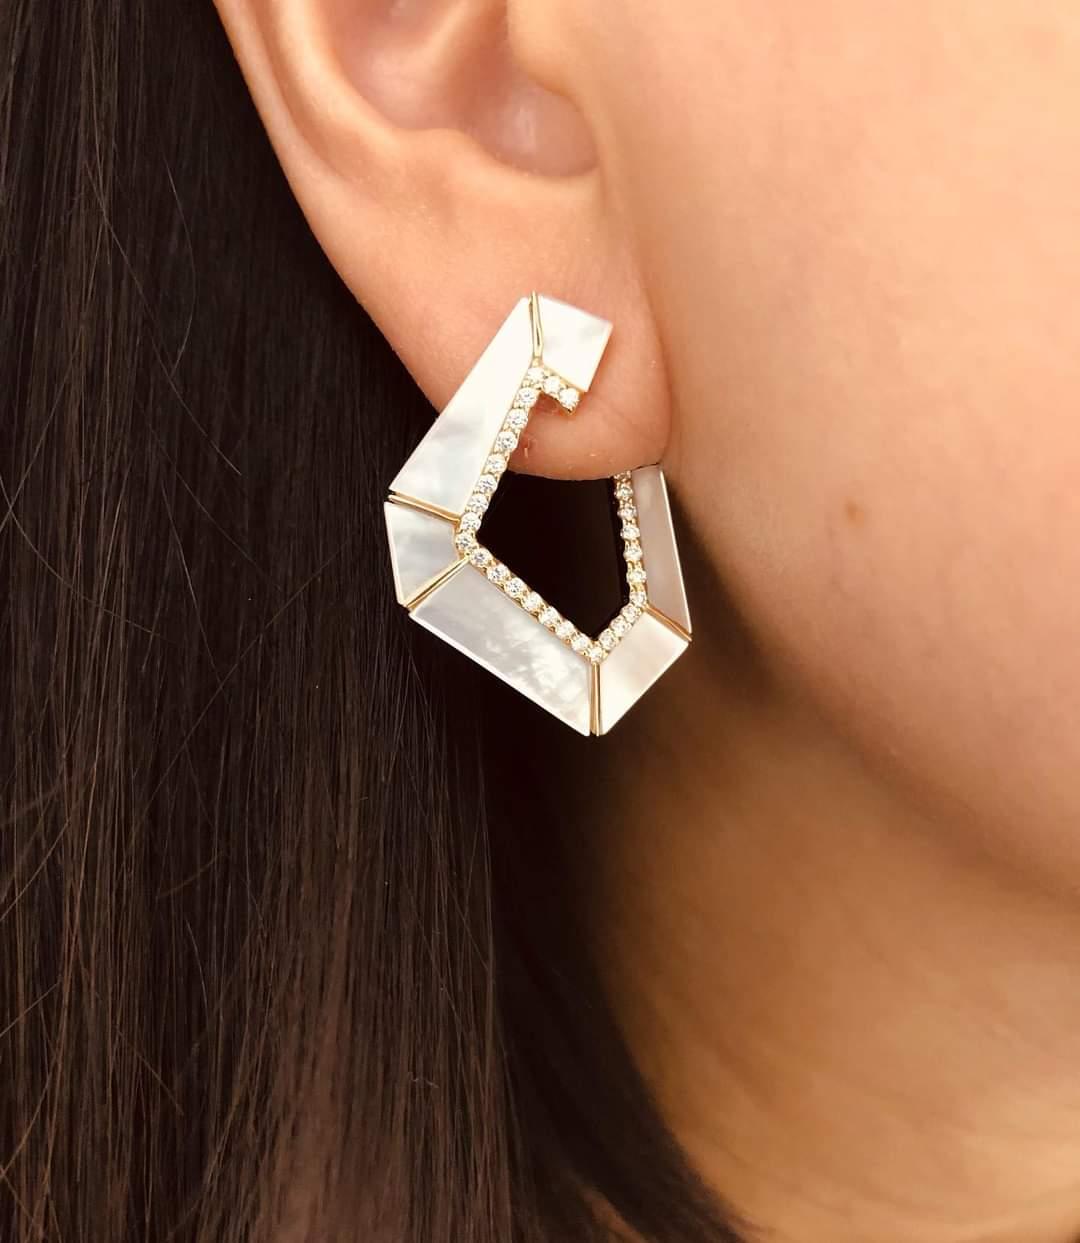 Origami Link No. 5 Mother of Pearl and Diamond 0.50 carat Grande Earrings 18k Gold

Width: 2.0 cm
Length: 3.0 cm 

With merely 5 simple folds, the starting point for Link No.5 was a piece of scrap paper. The designers intentionally stopped at 5